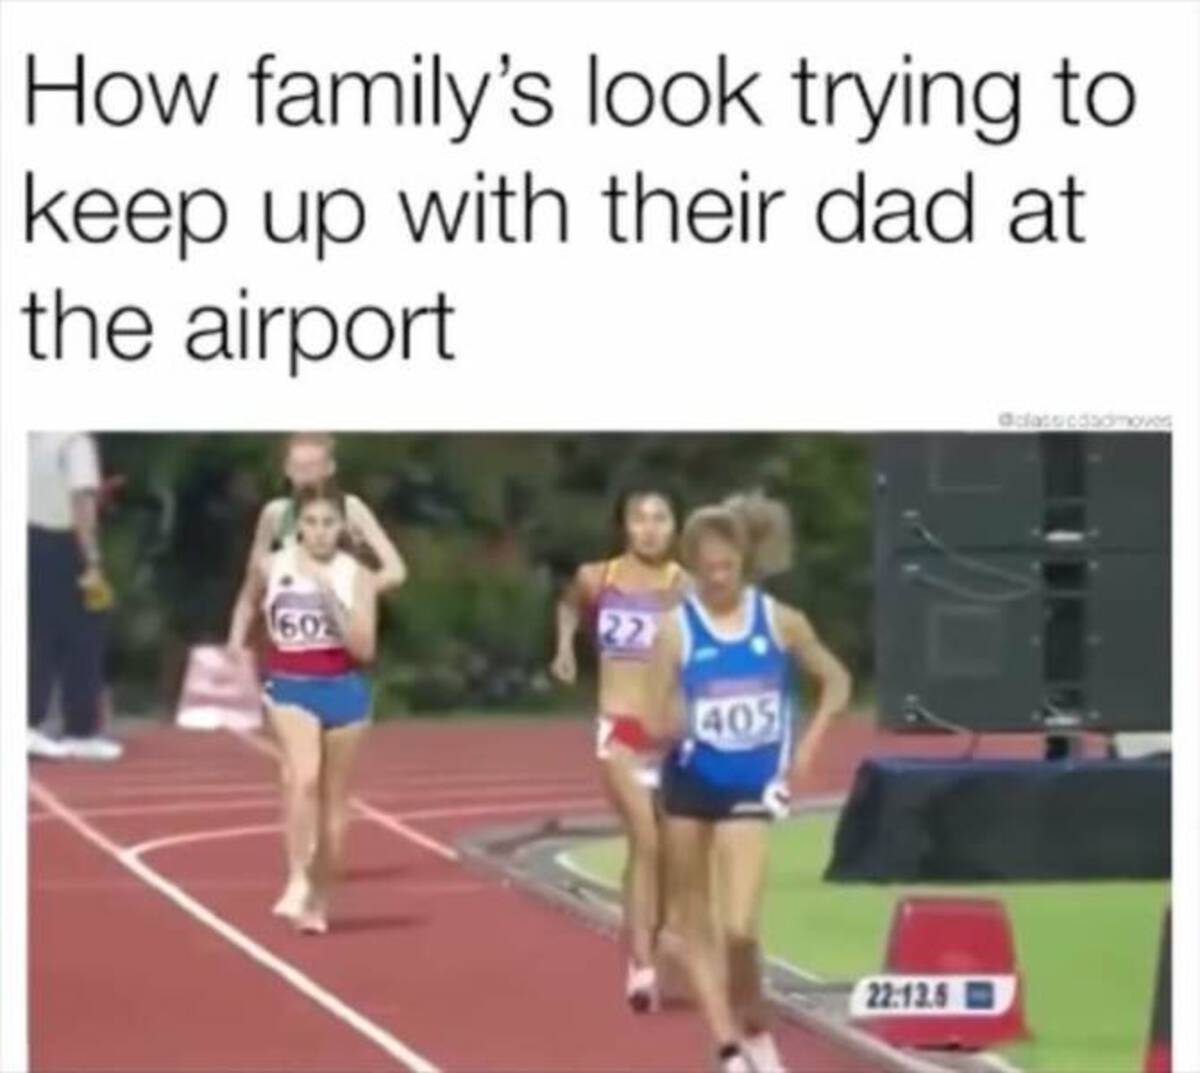 athlete - How family's look trying to keep up with their dad at the airport 602 22 405 .5